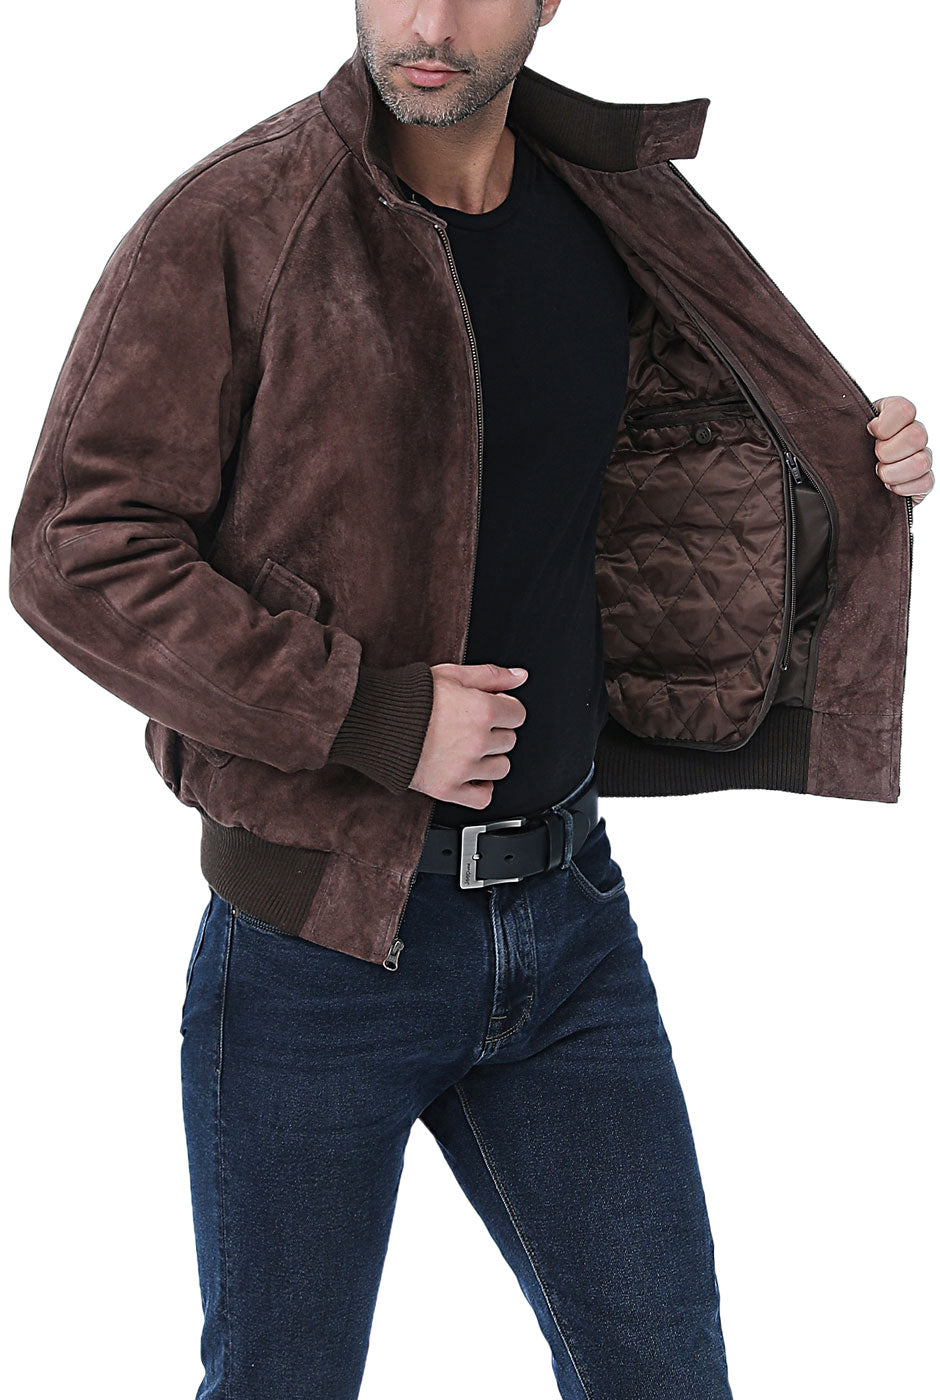 Landing Leathers Monogram Collection Men WWII Suede Leather Bomber Jacket